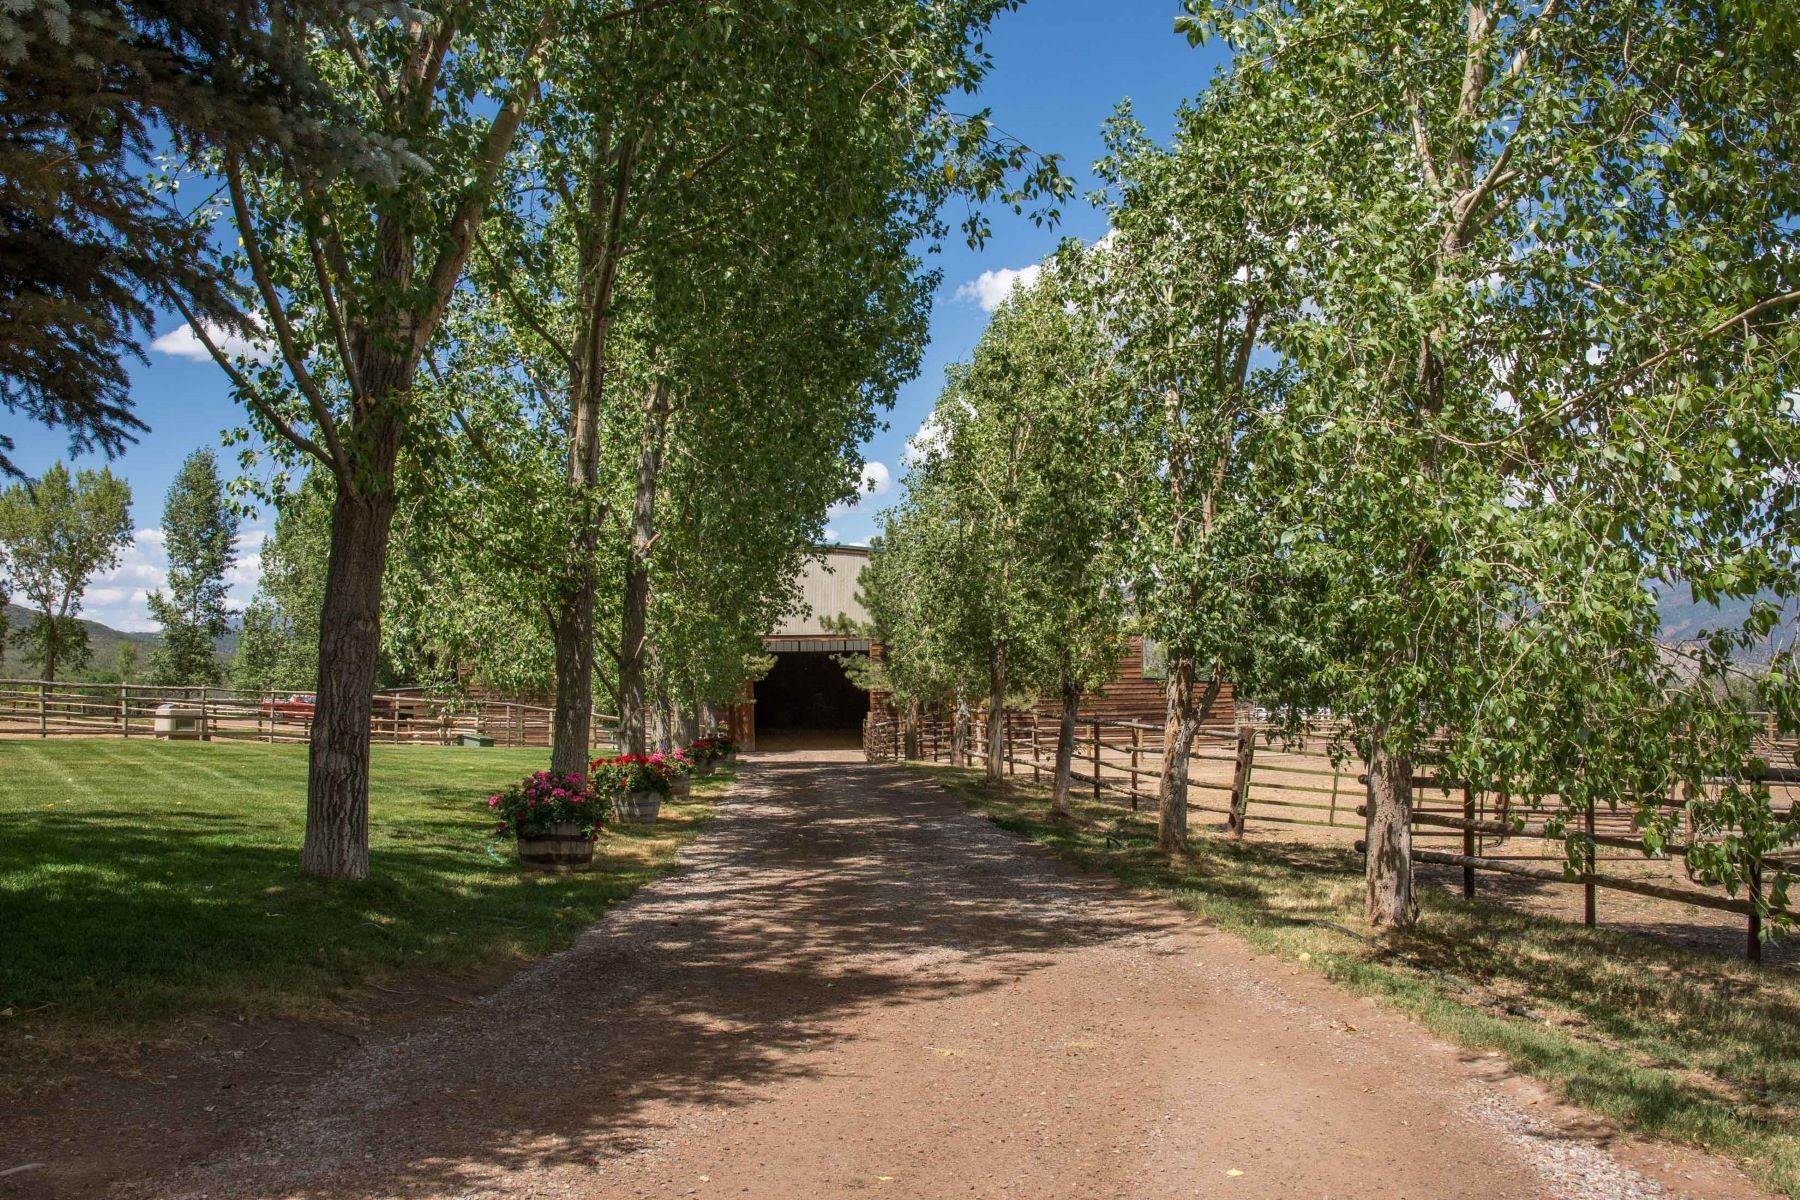 33. Farm and Ranch Properties at 1321 Elk Creek & TBD McCabe Ranch Road Old Snowmass, Colorado 81654 United States